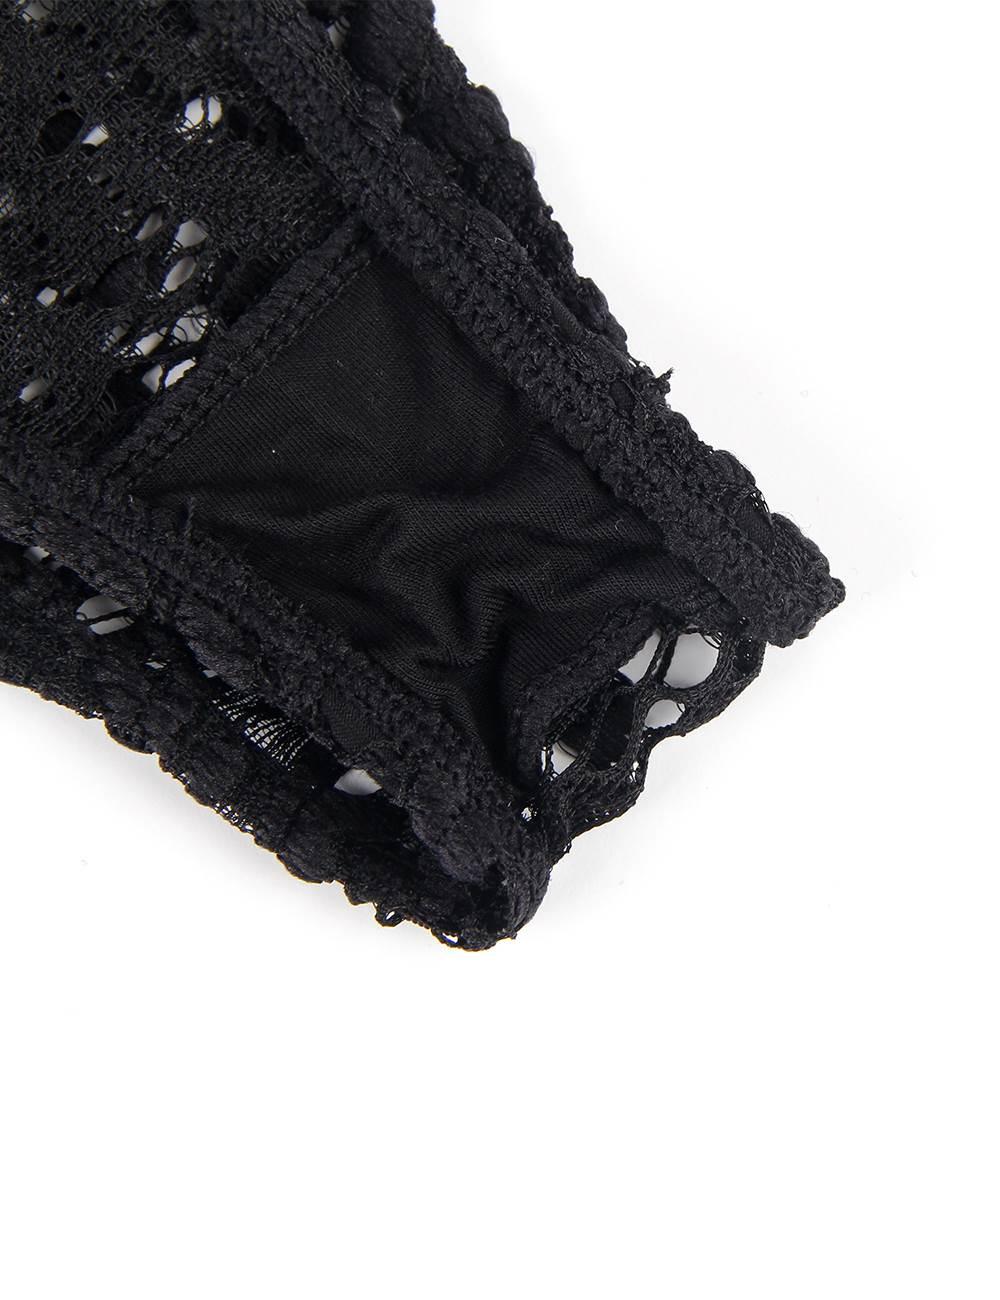 Push Up Cup Lace Teddy crotch